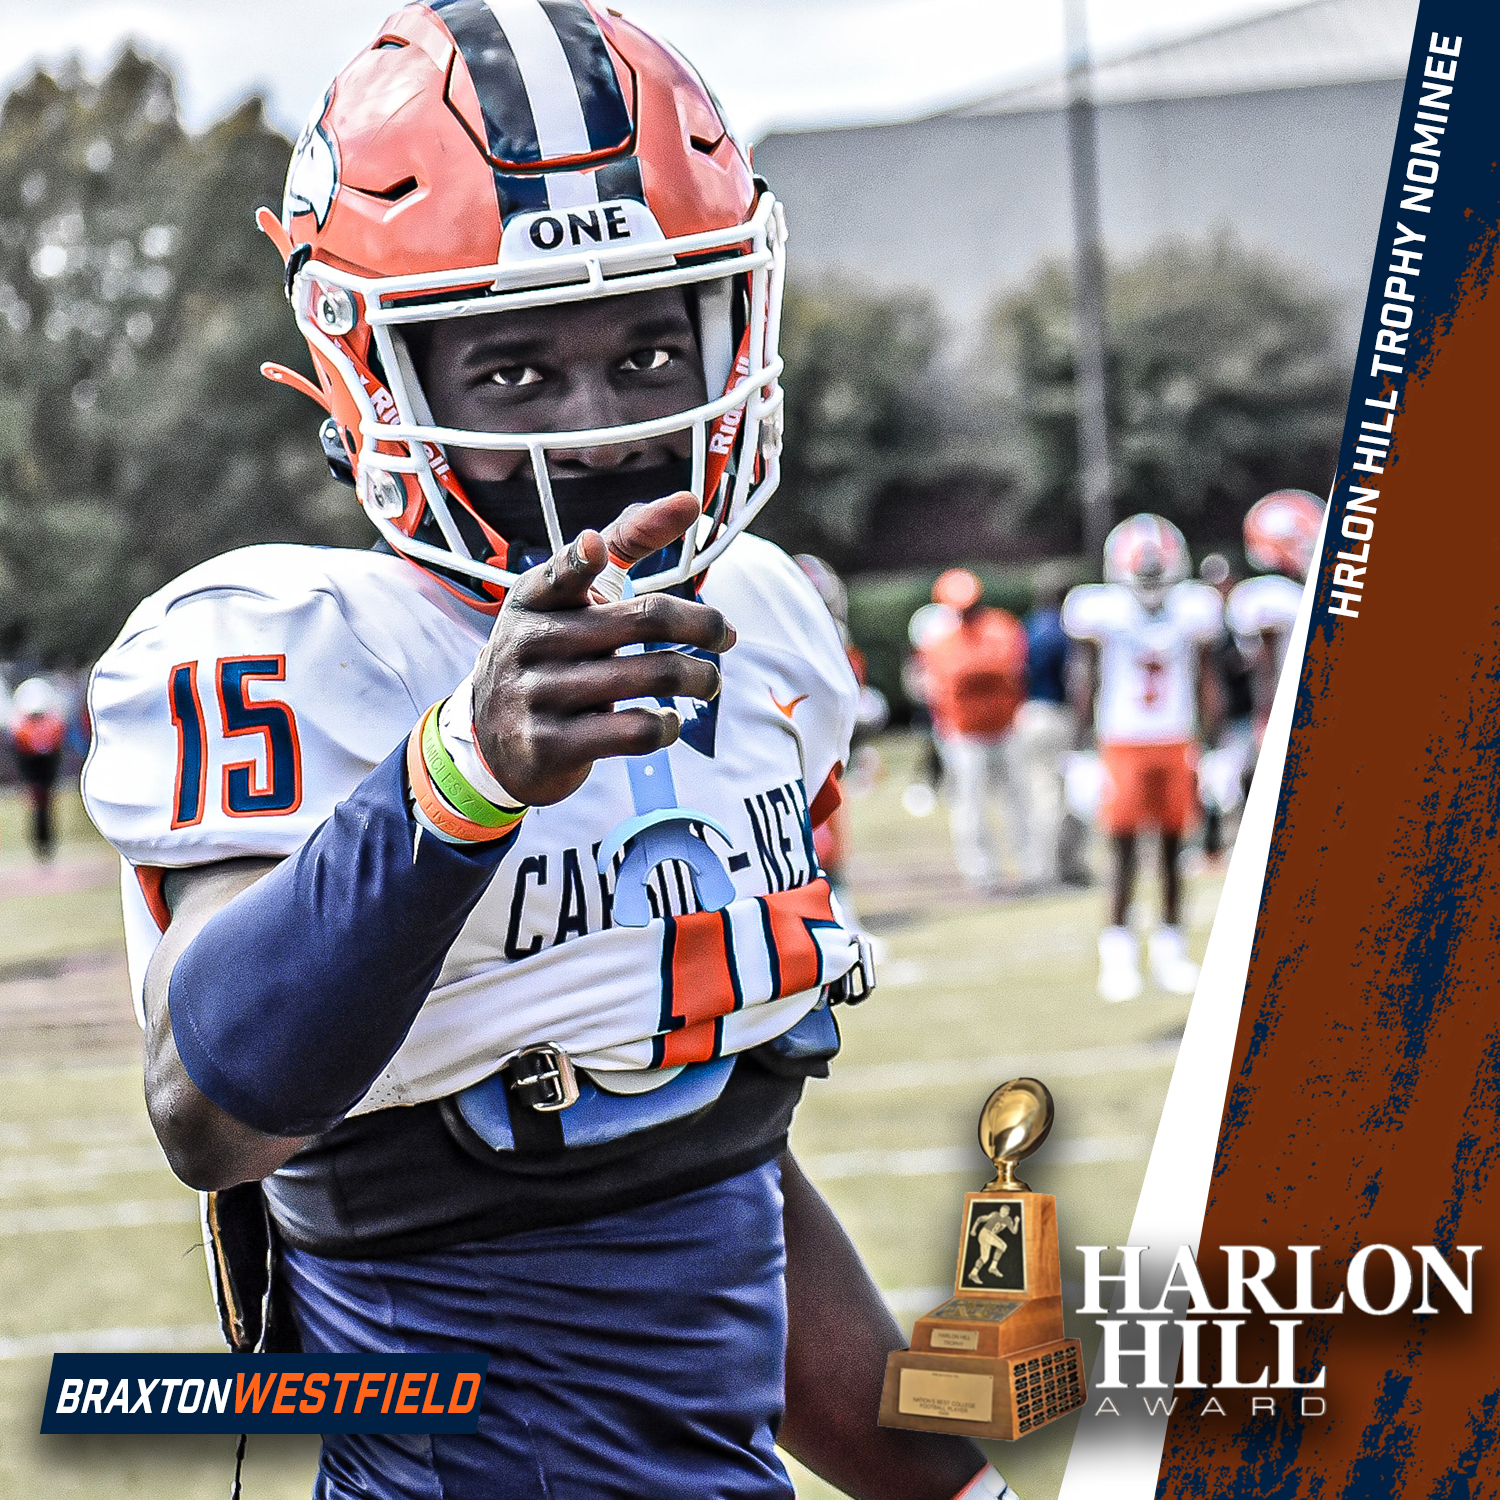 Westfield nominated for Harlon Hill Trophy